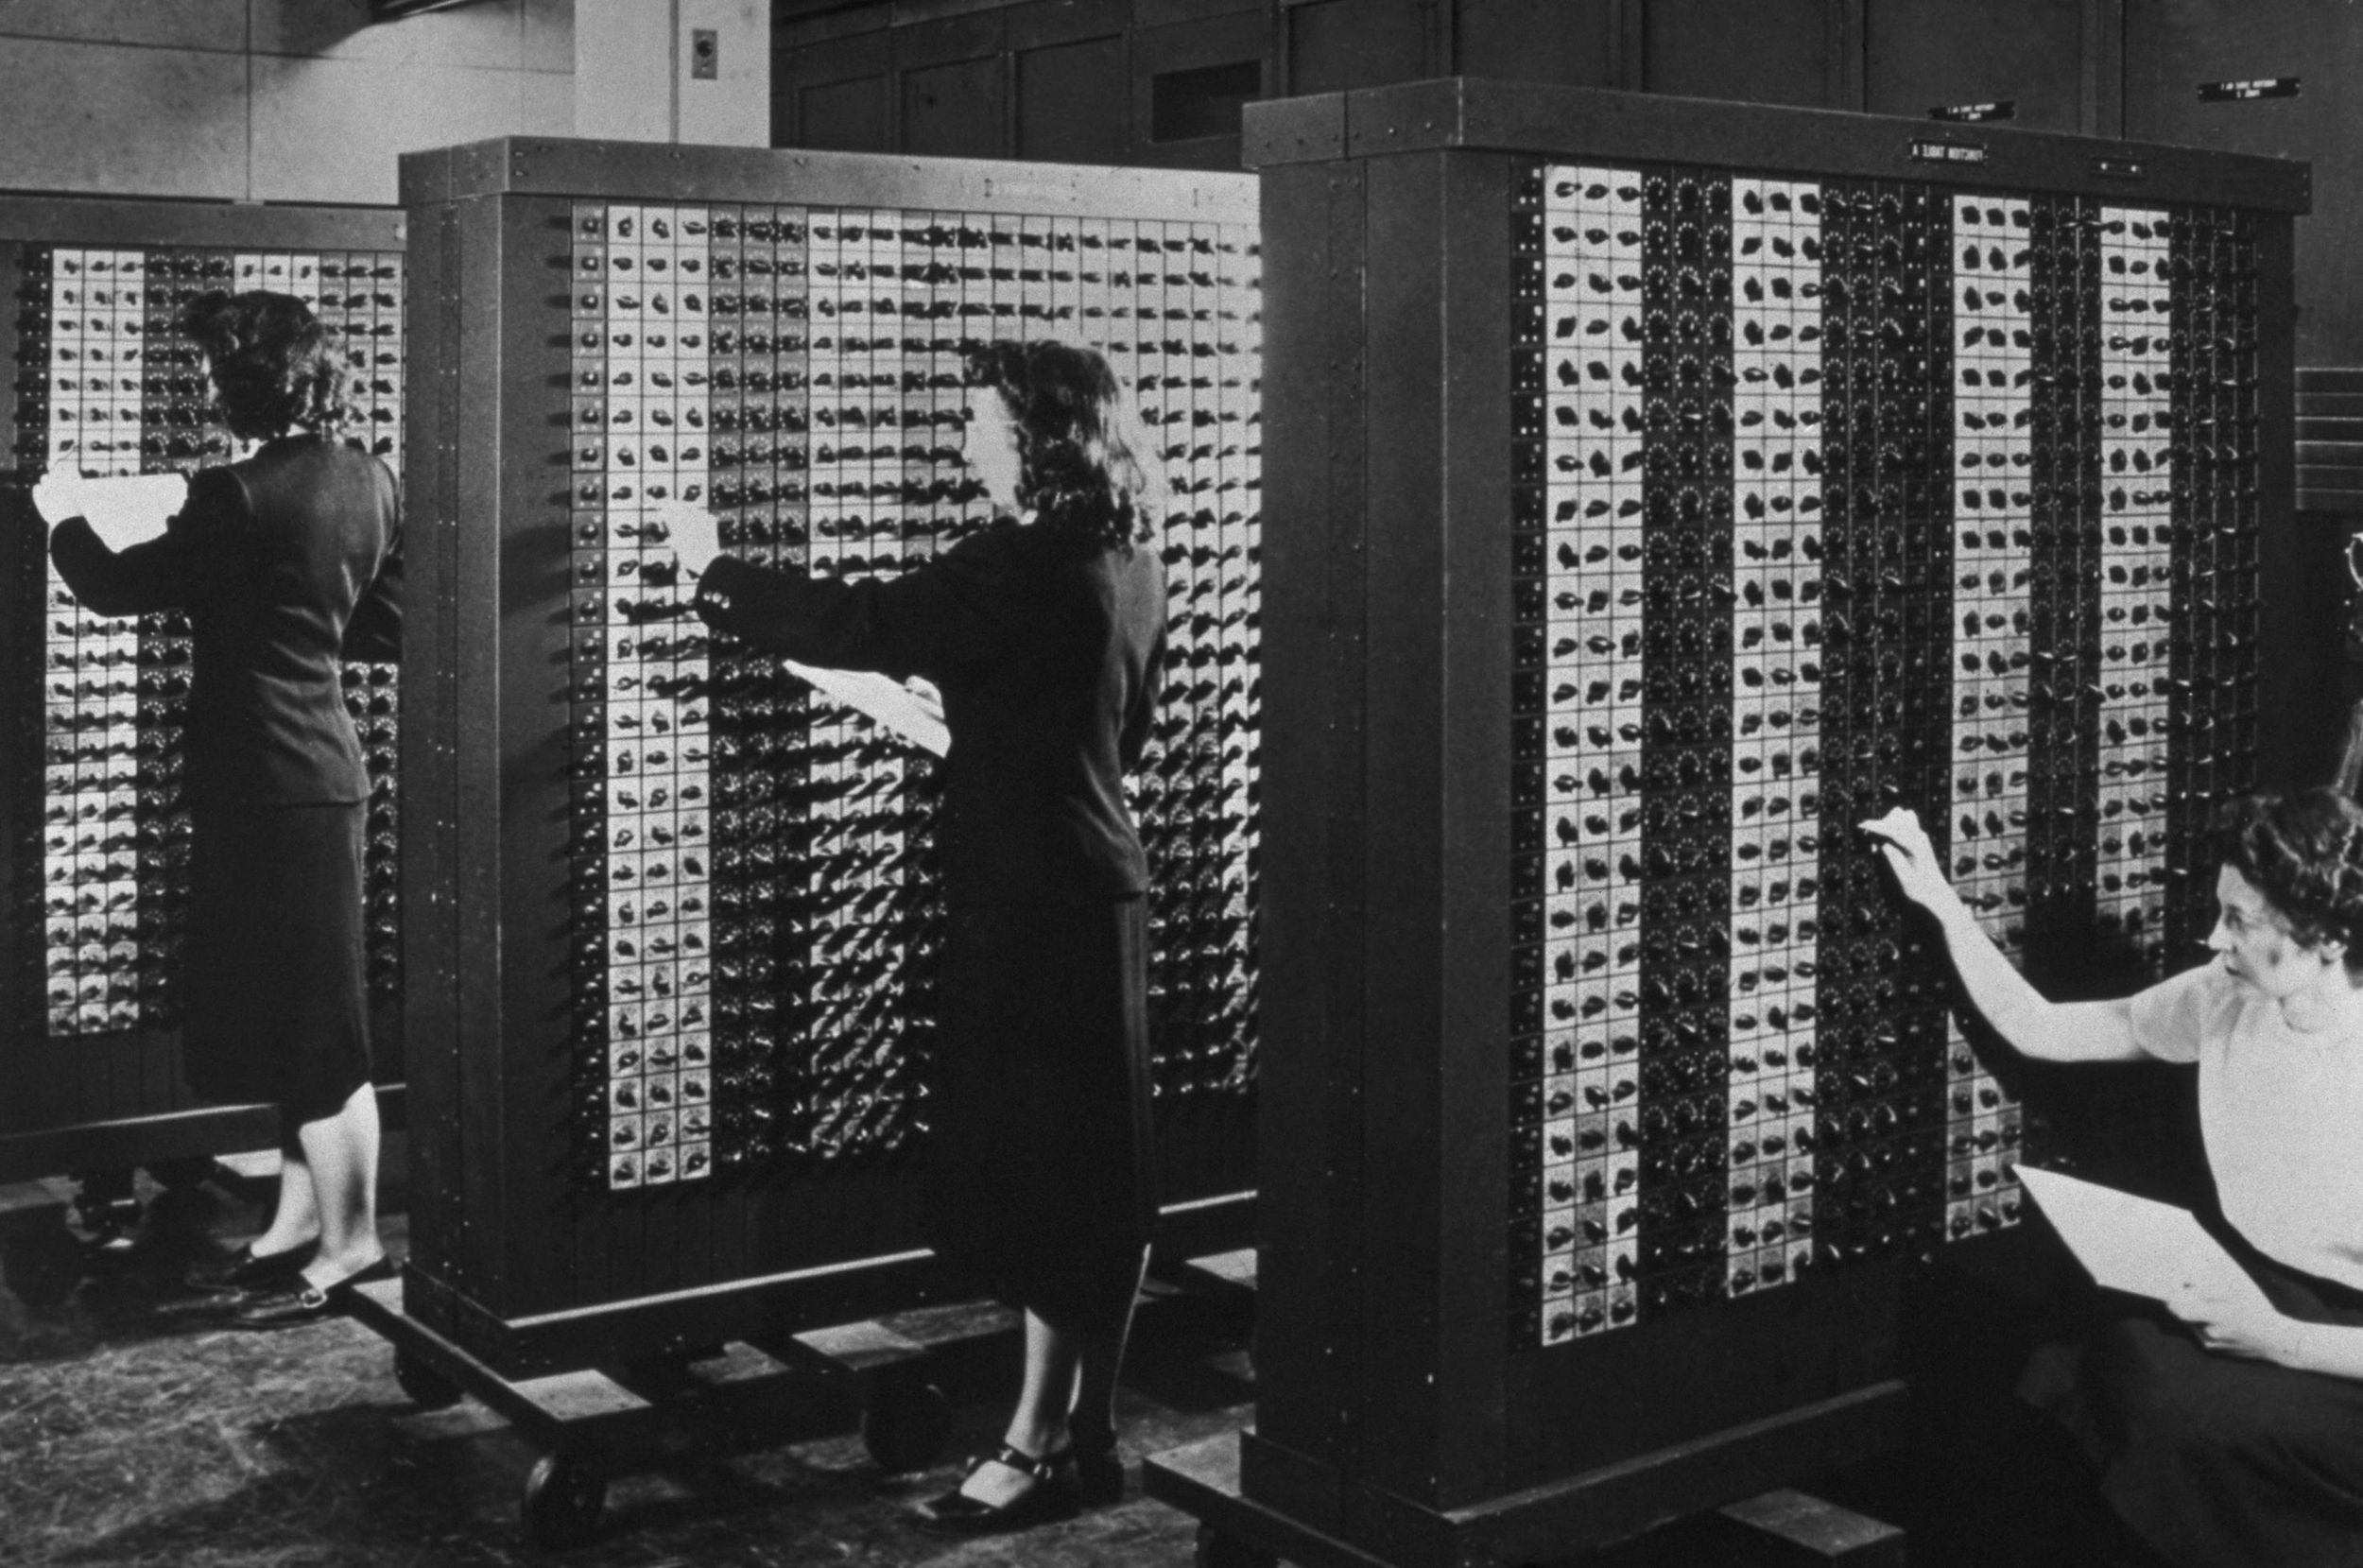 Black and white image of three women, each in front of a large wheeled cabinet faced with countless rotary switches